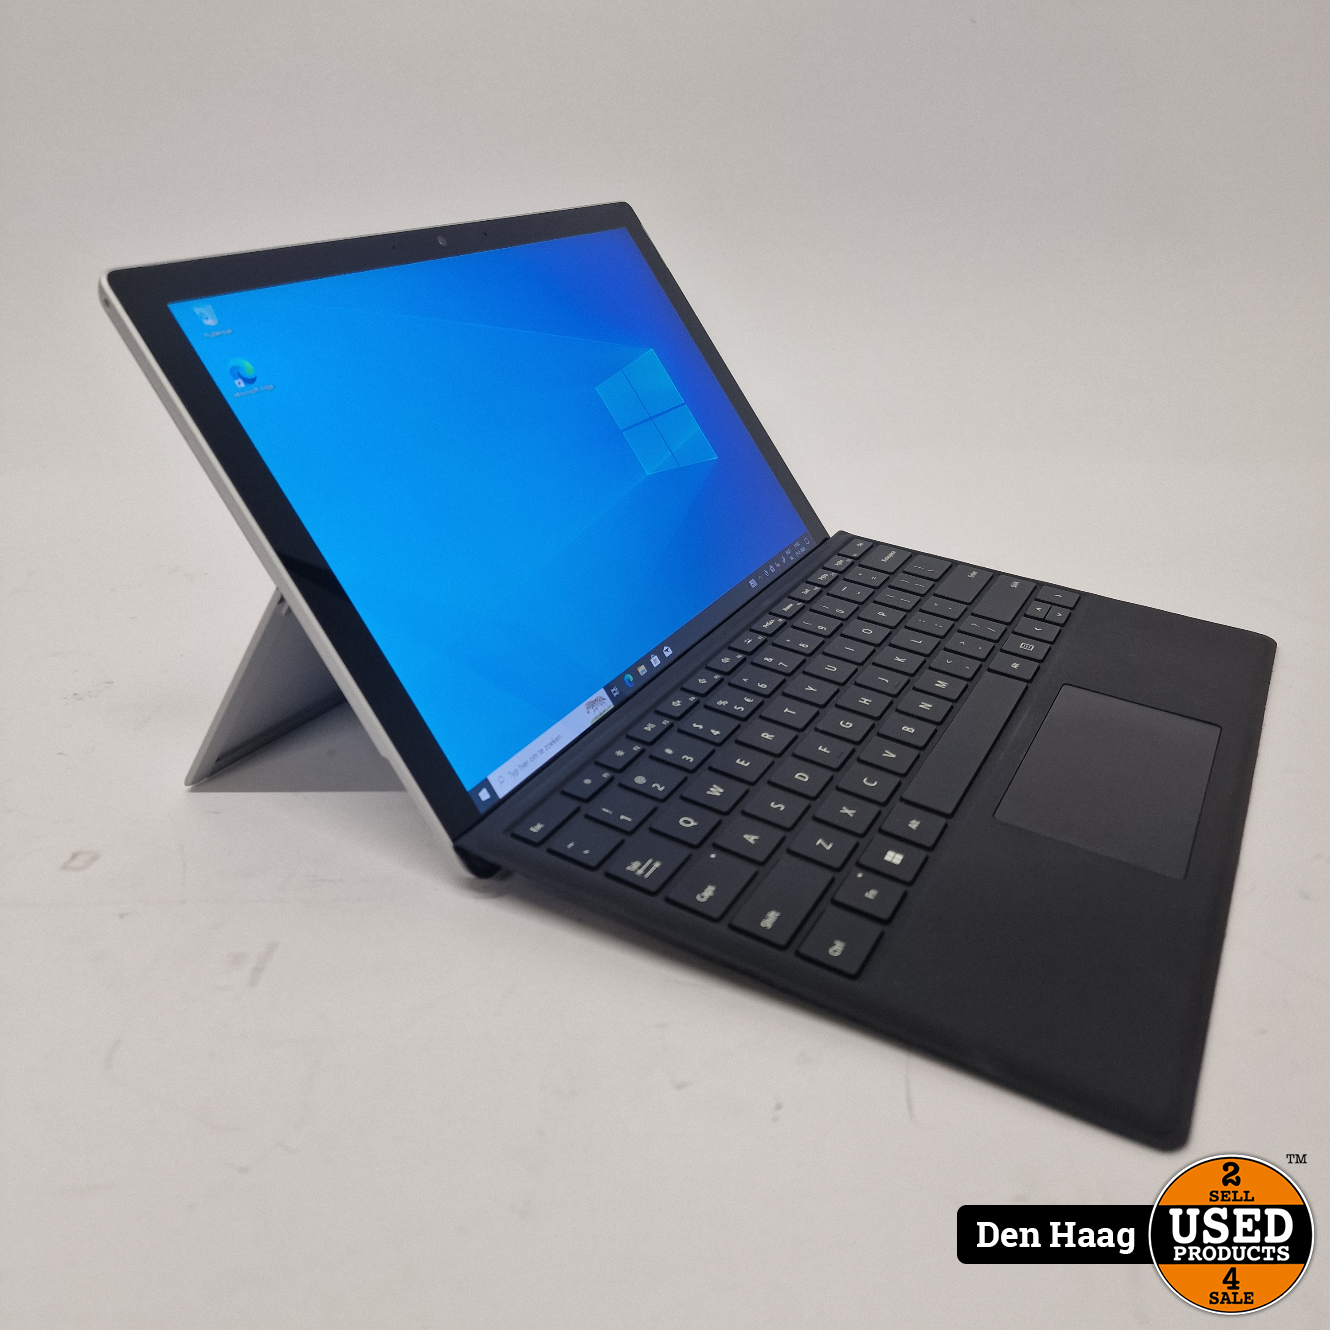 Surface Pro 7+ i5-135G7 16GB 256GBb 12.3 inch incl - Products Den Haag